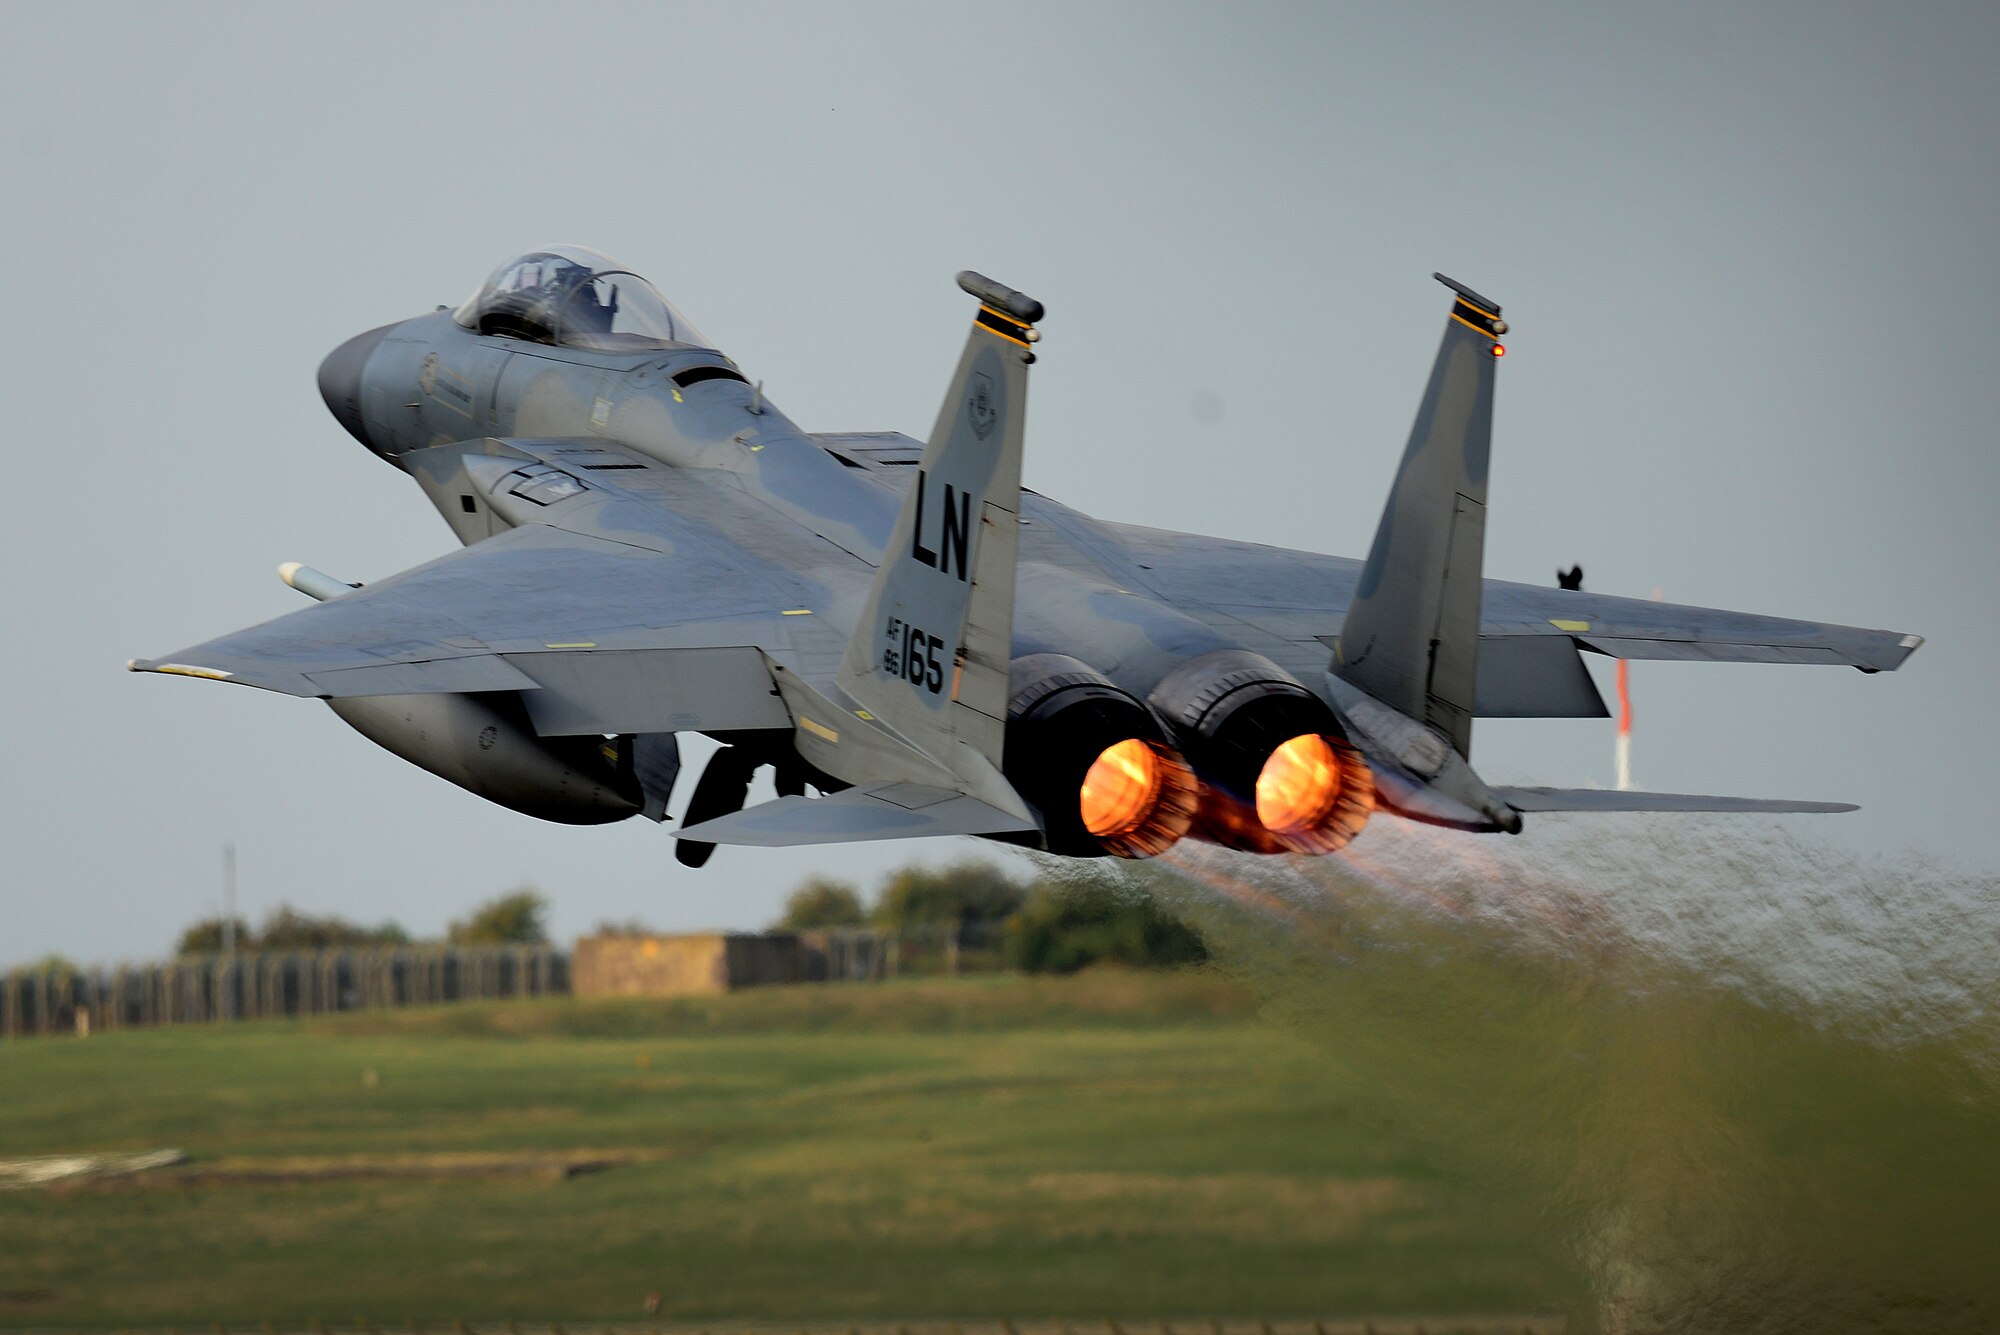 An F-15C Eagle assigned to the 493rd Fighter Squadron launches for a sortie in support of exercise One Sky at Royal Air Force Lakenheath, England Sept. 19, 2018. The bilateral U.S., Poland training event focused on exercising rapid, responsive air operations over Poland in the event of a crisis contingency. Specific operations included defensive counter-air missions designed to improve interoperability and collective self-defense tactics and procedures. (U.S. Air Force photo/ Tech. Sgt. Matthew Plew)